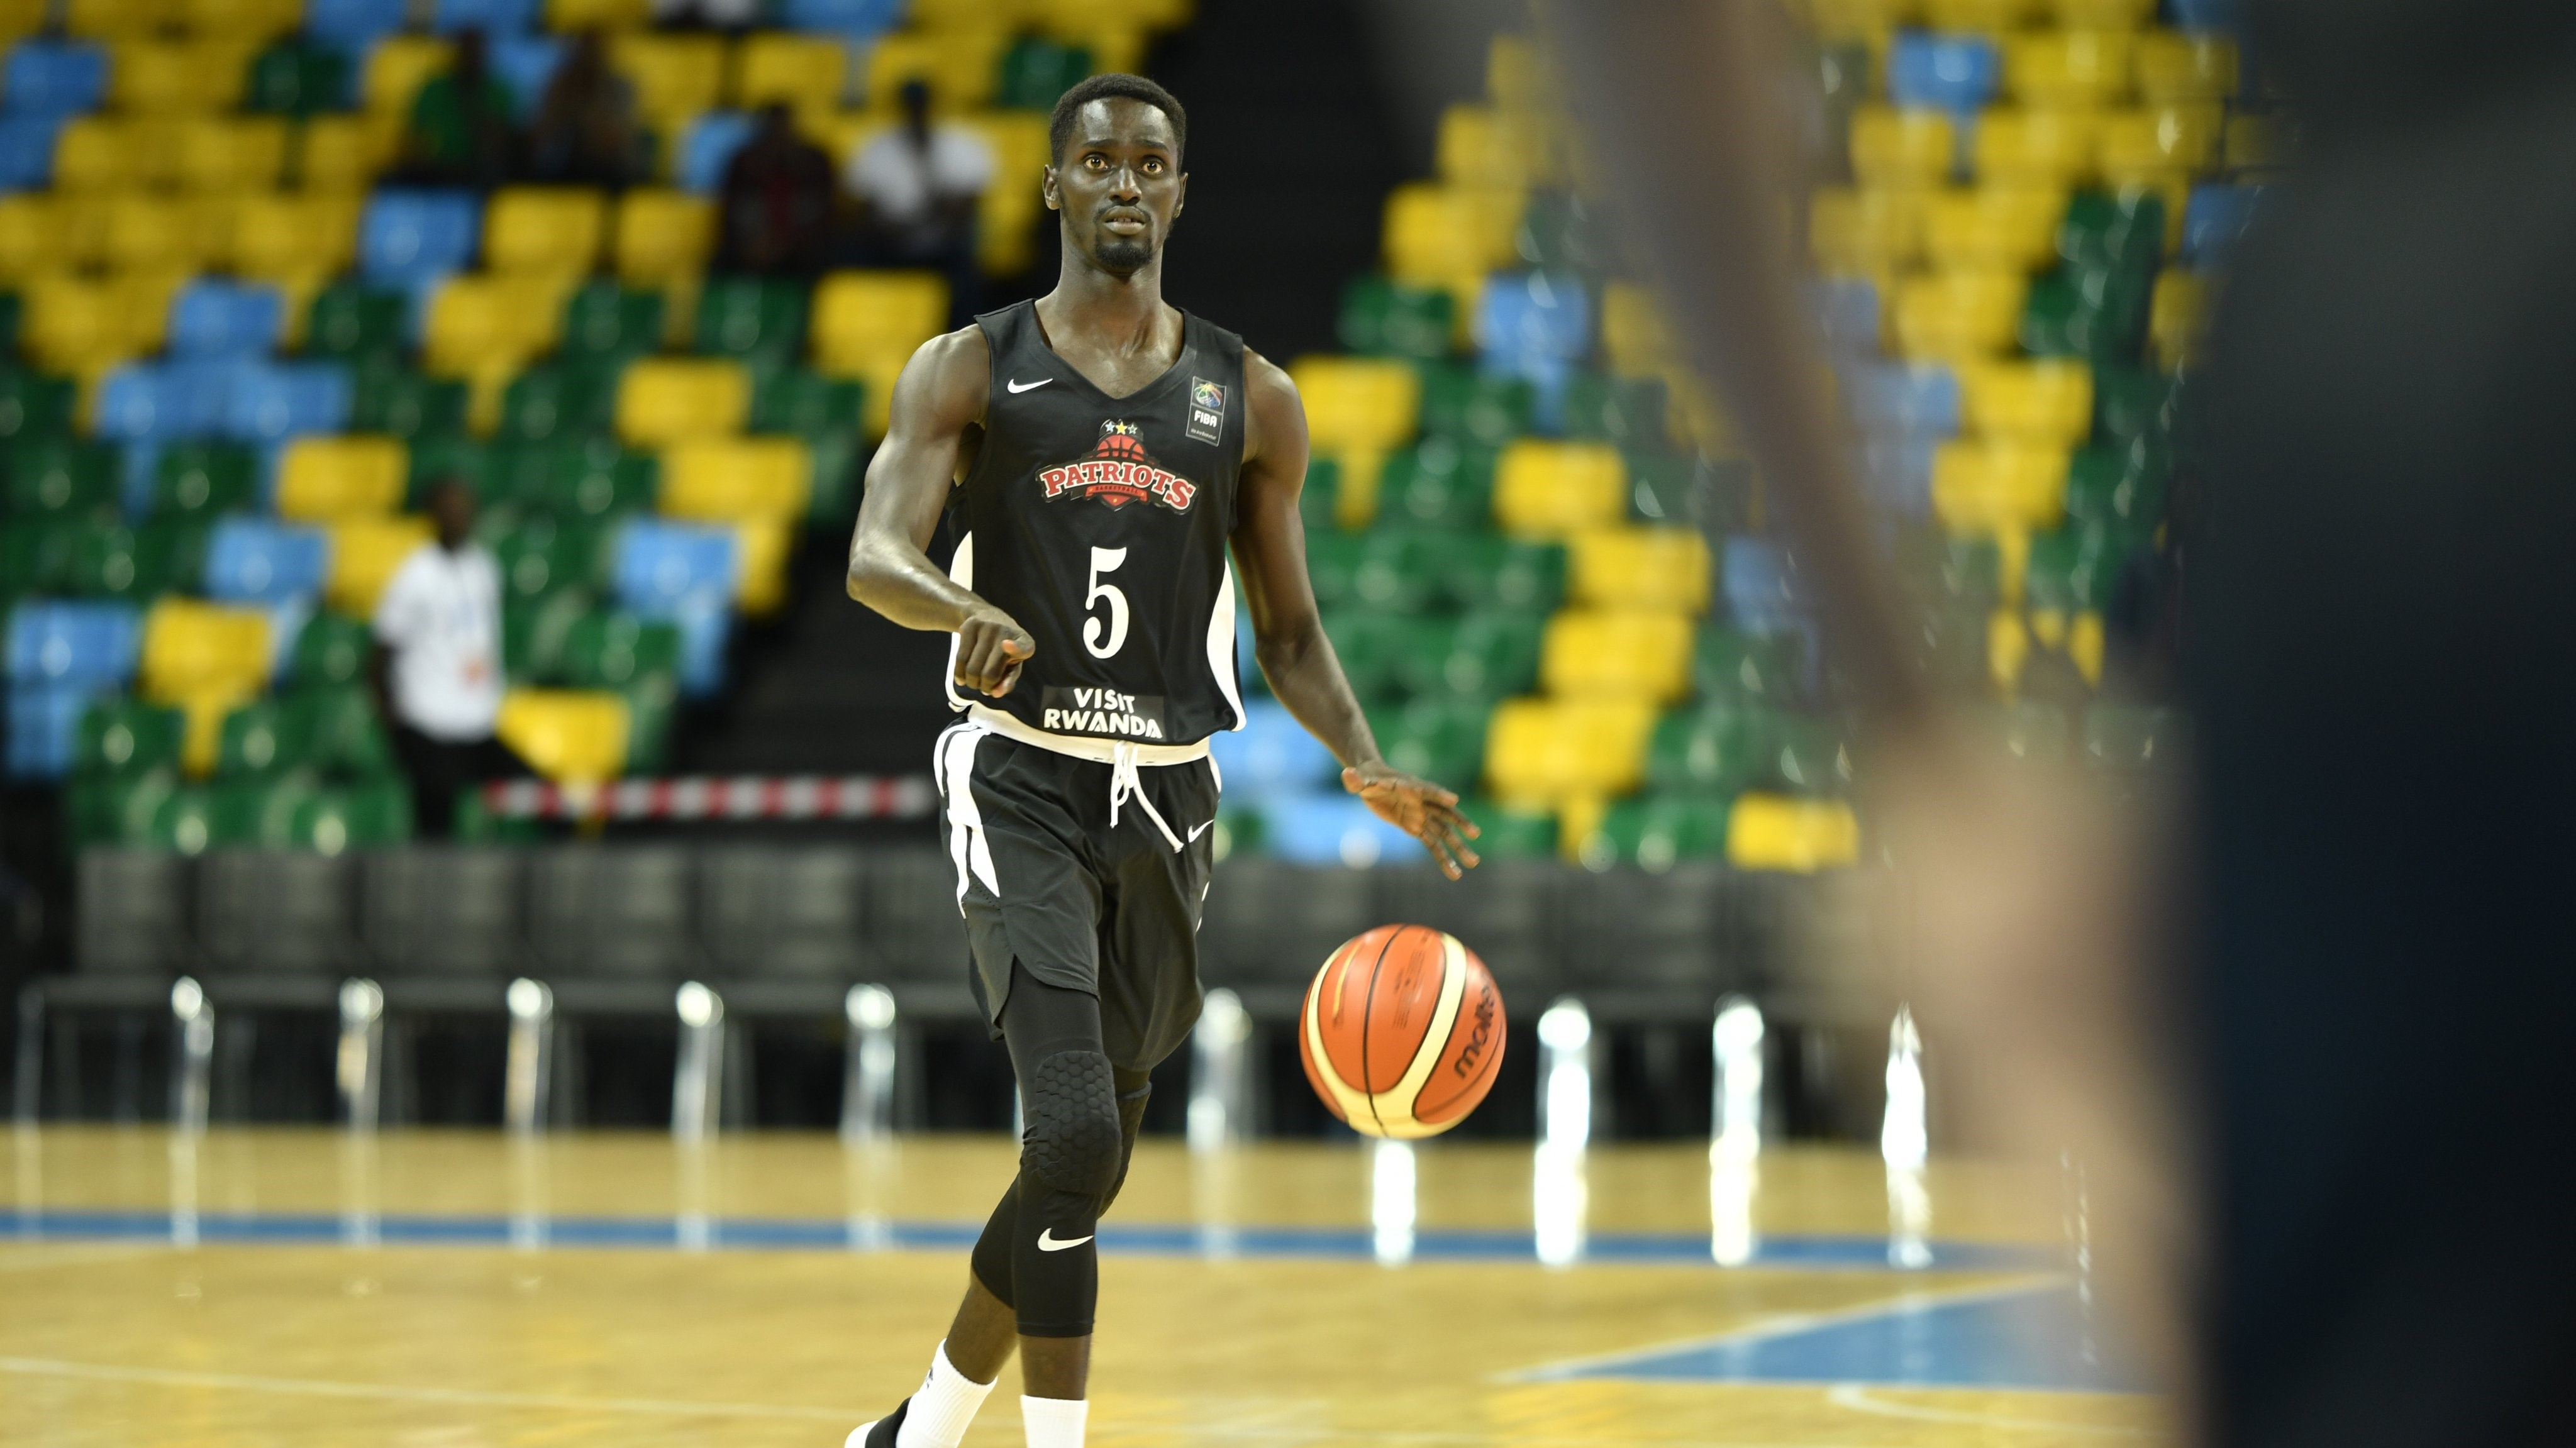 Sedar Sagamba scored 10 points during Patriots' 76-53 win over UNZA Pacers of Zambia at Kigali Arena on Wednesday Night. 